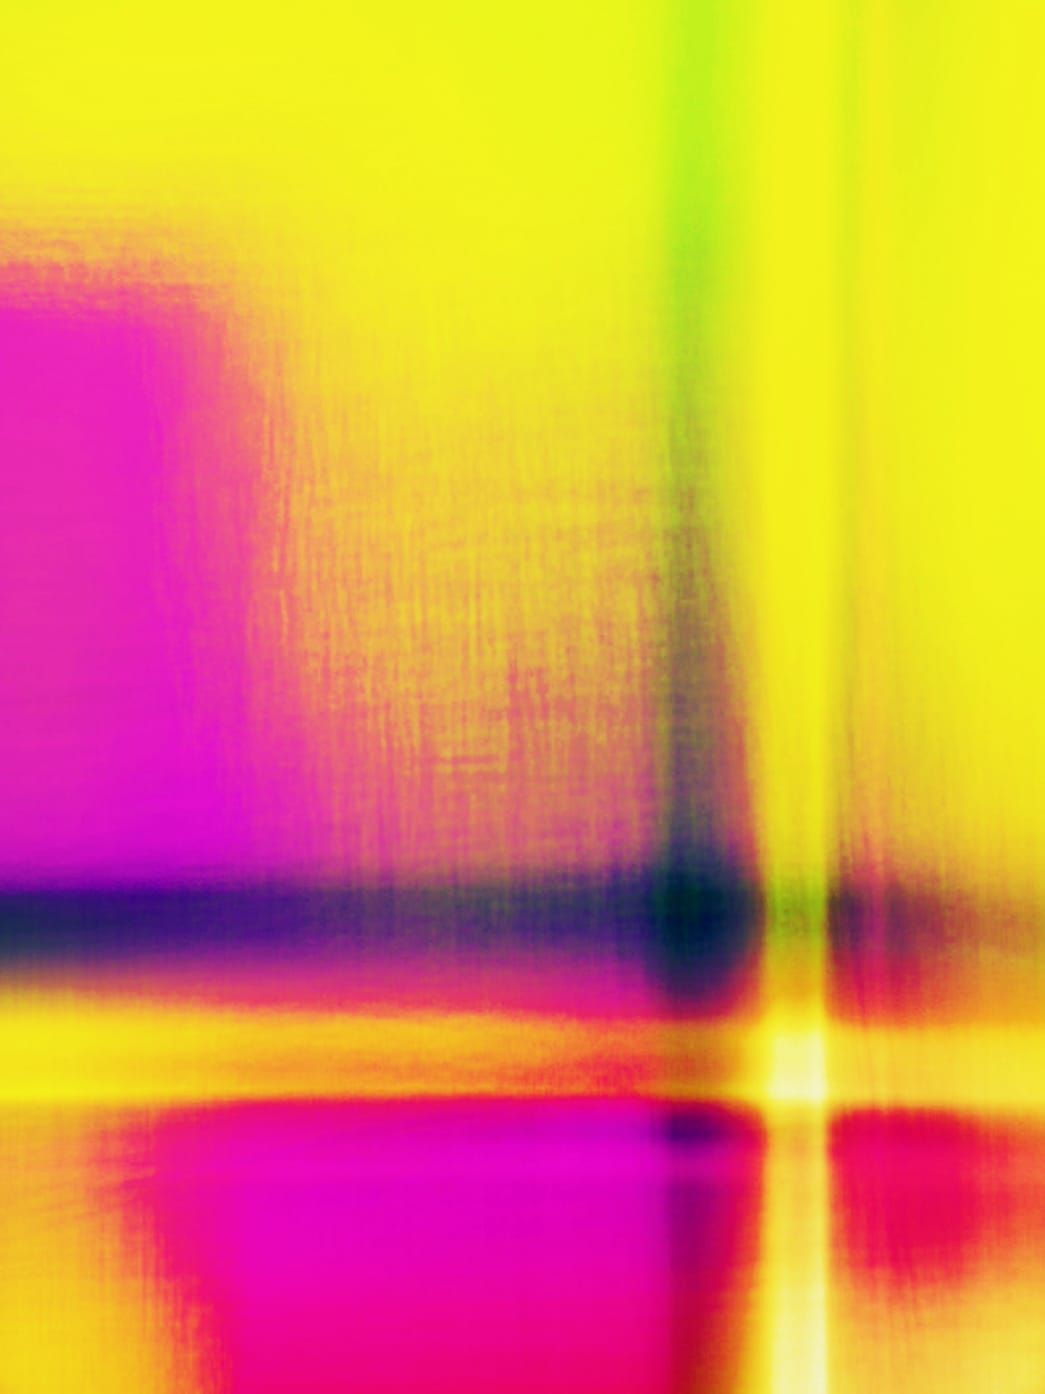 Photography, scanography by Michael Monney aka acylmx, Abstract image in yellow, pink and purple.